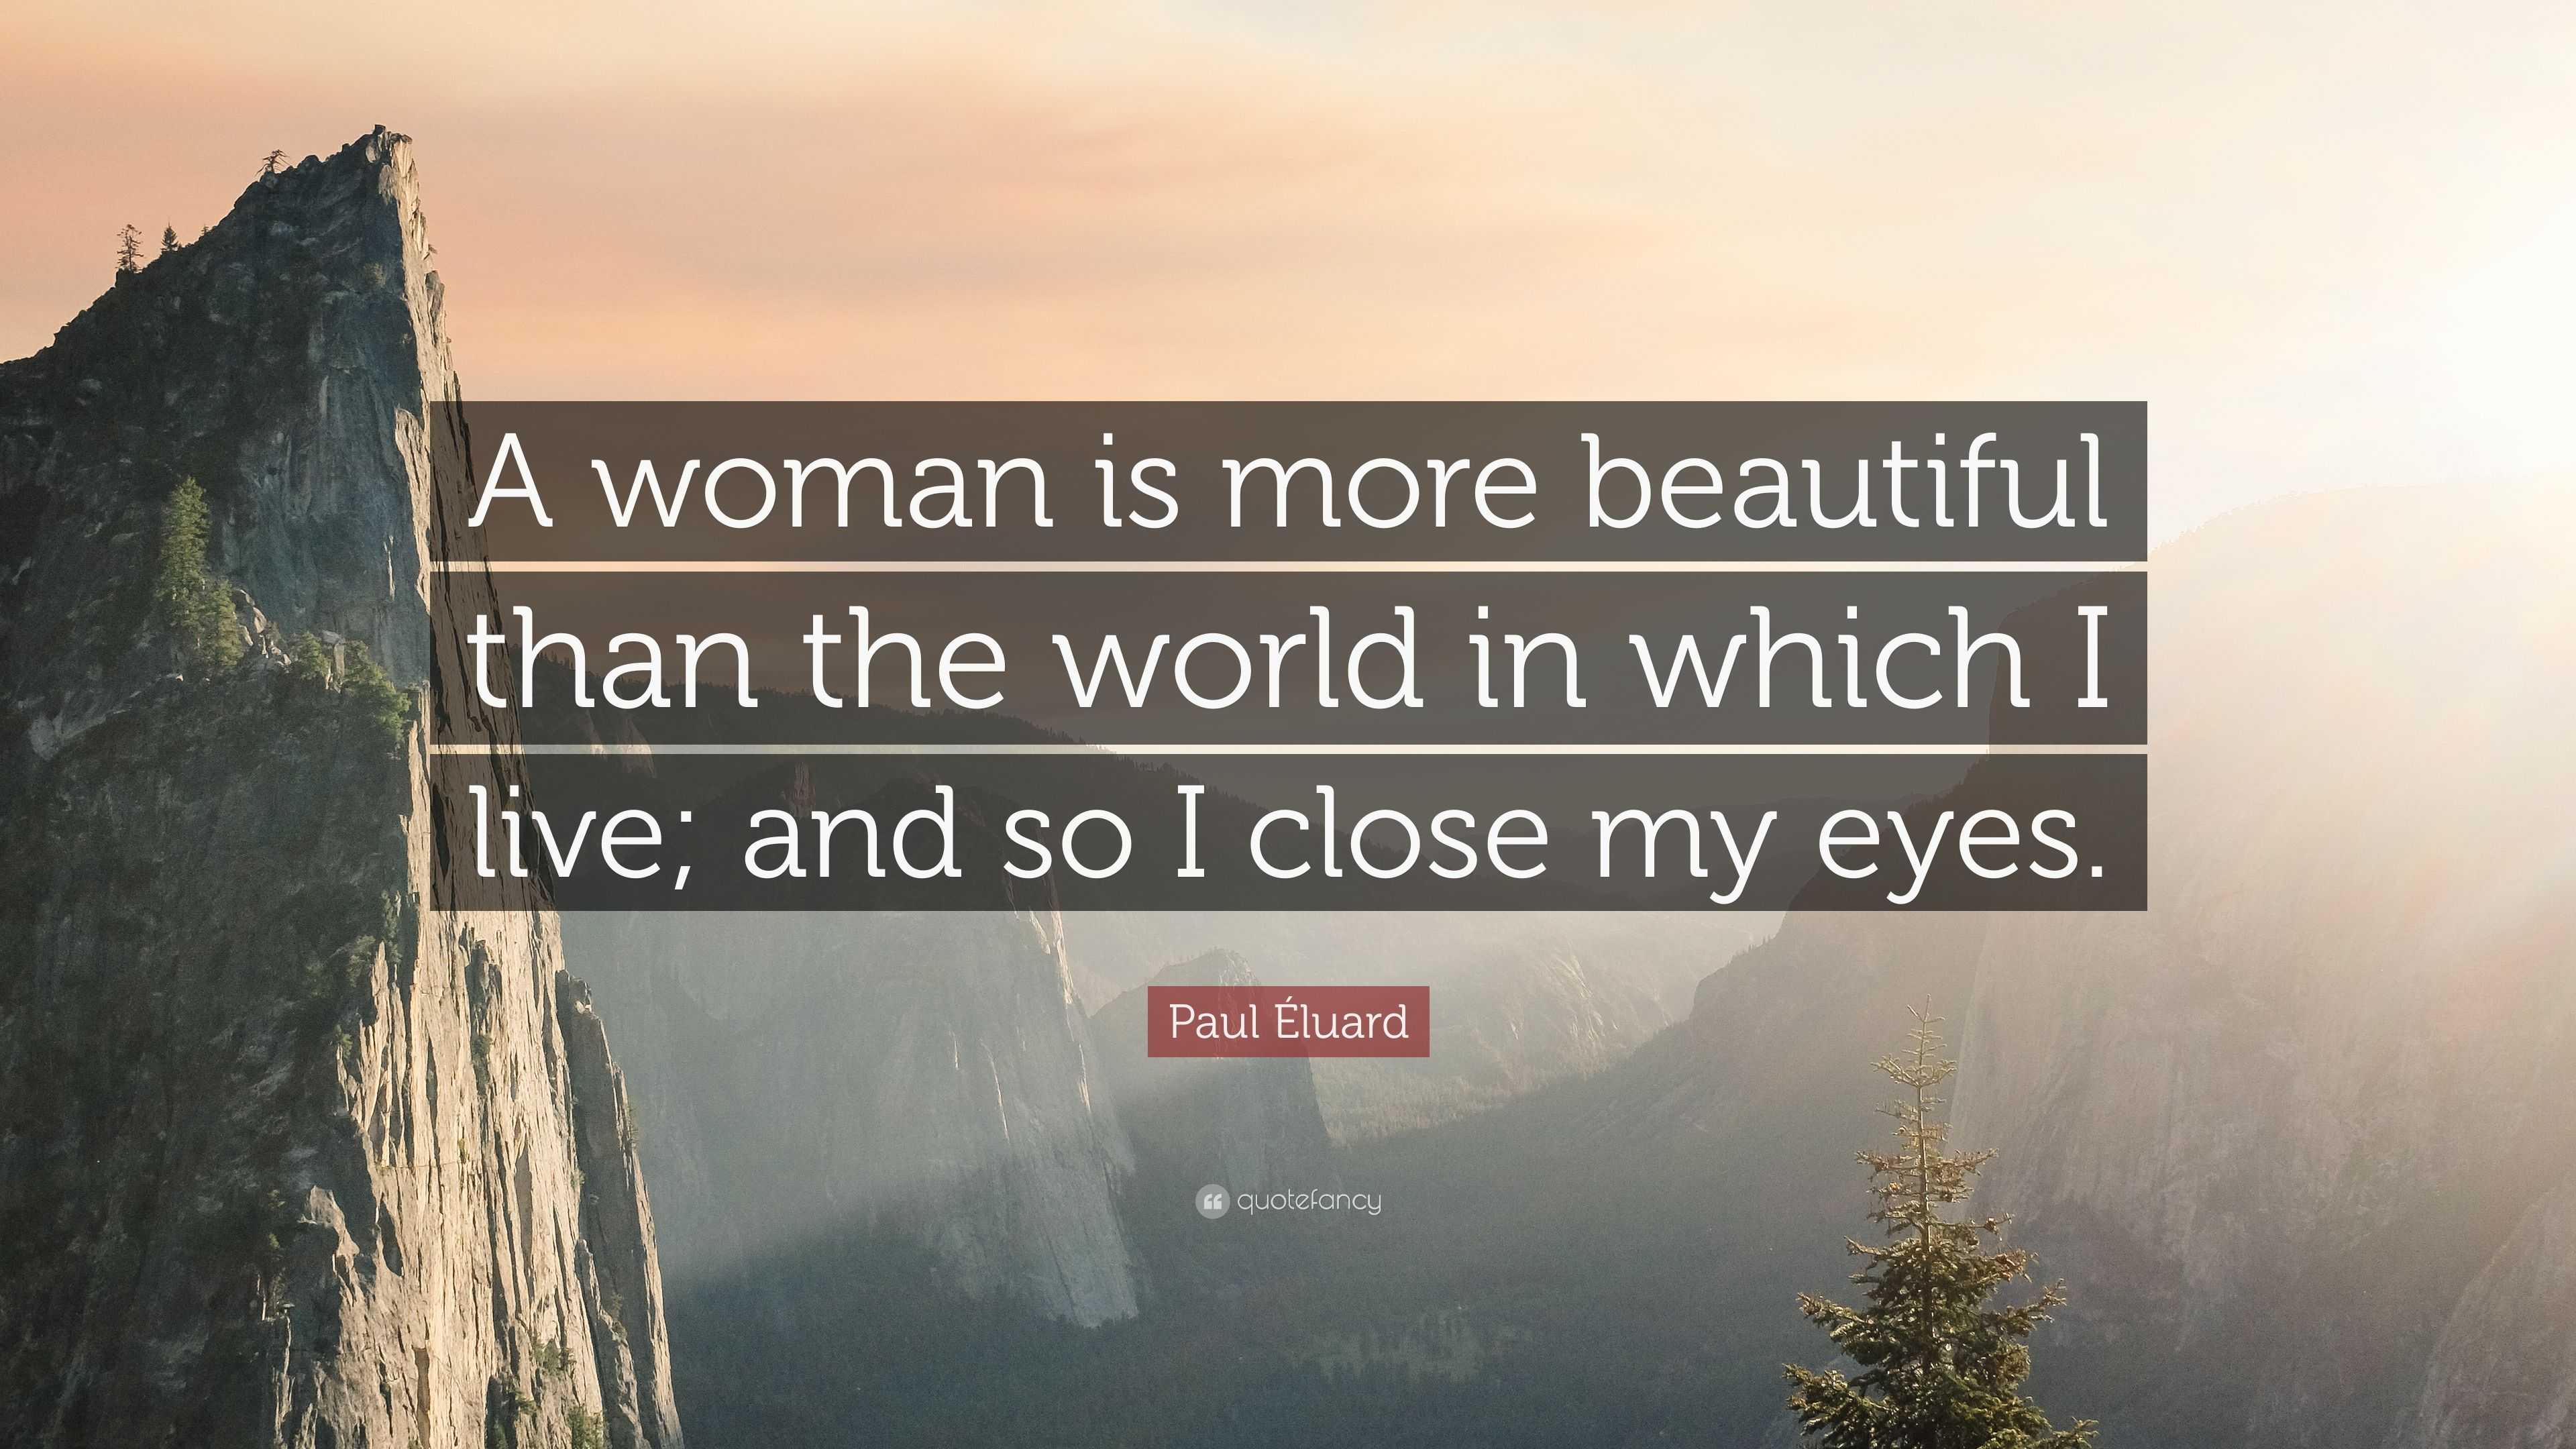 Paul Éluard Quote: “A woman is more beautiful than the world in which I ...